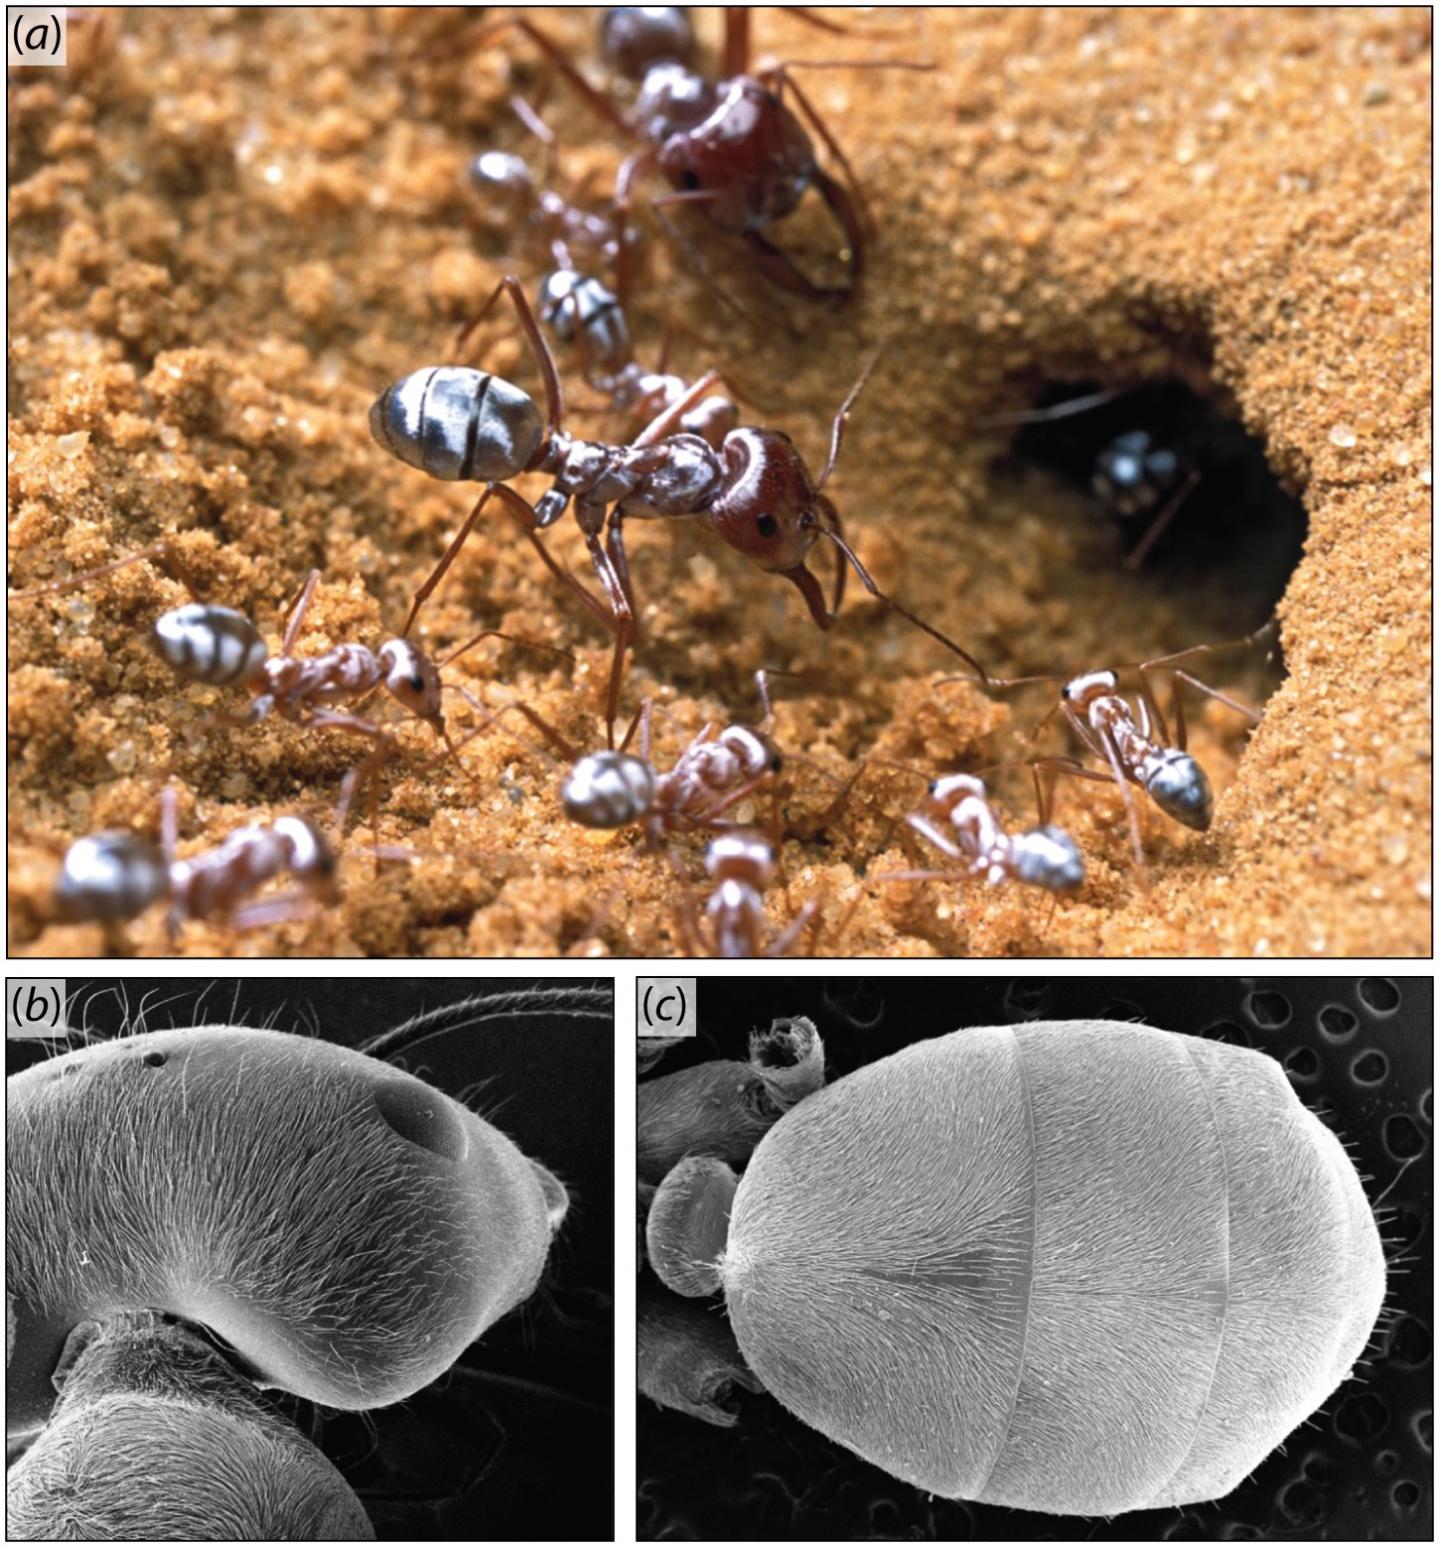 Reflective Saharan Silver Ant Hairs Thermoregulate, Create Bright Color (1 of 3)